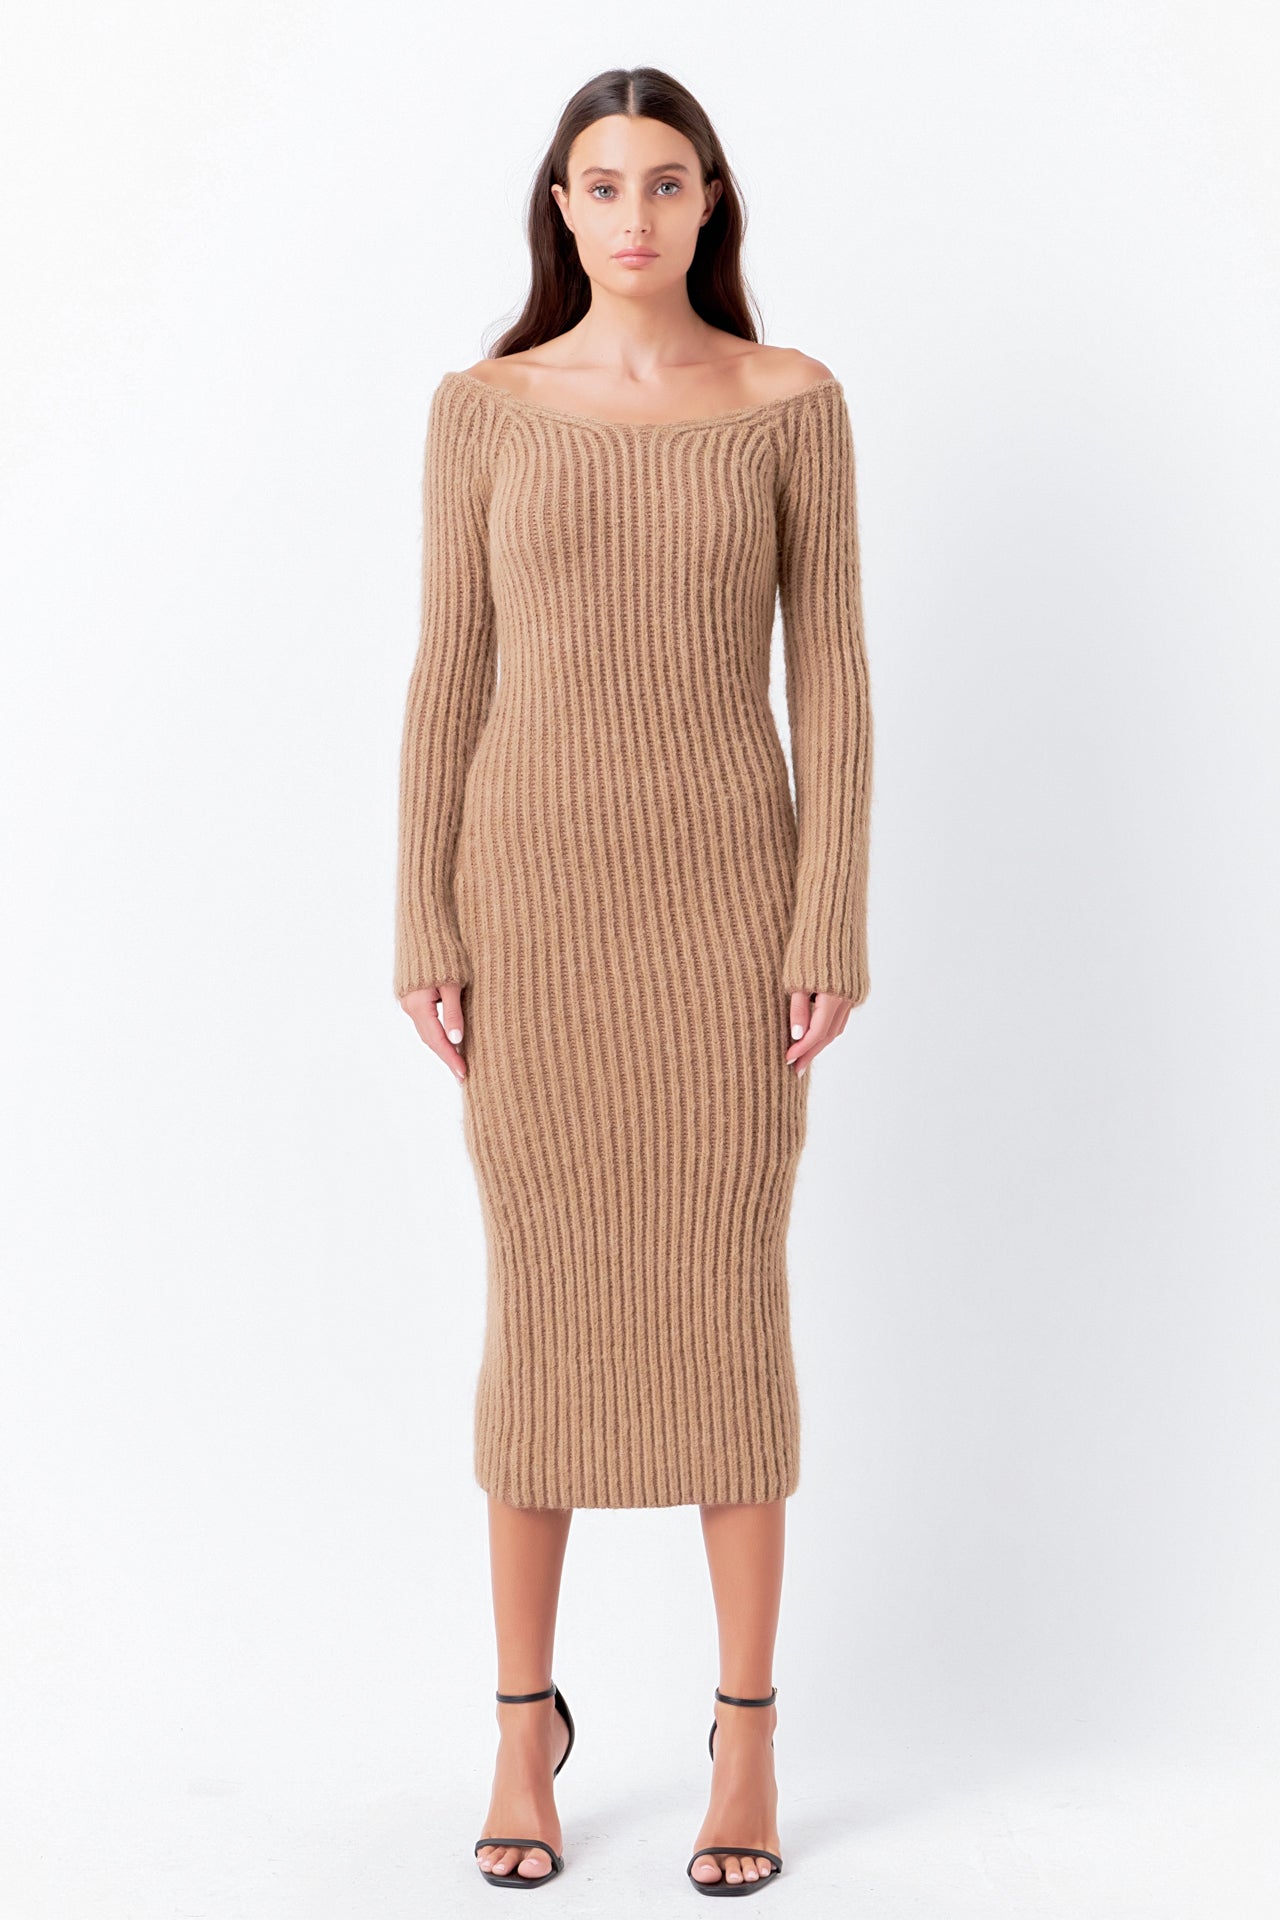 ENDLESS ROSE - Knit Off Shoulder Maxi Dress - DRESSES available at Objectrare